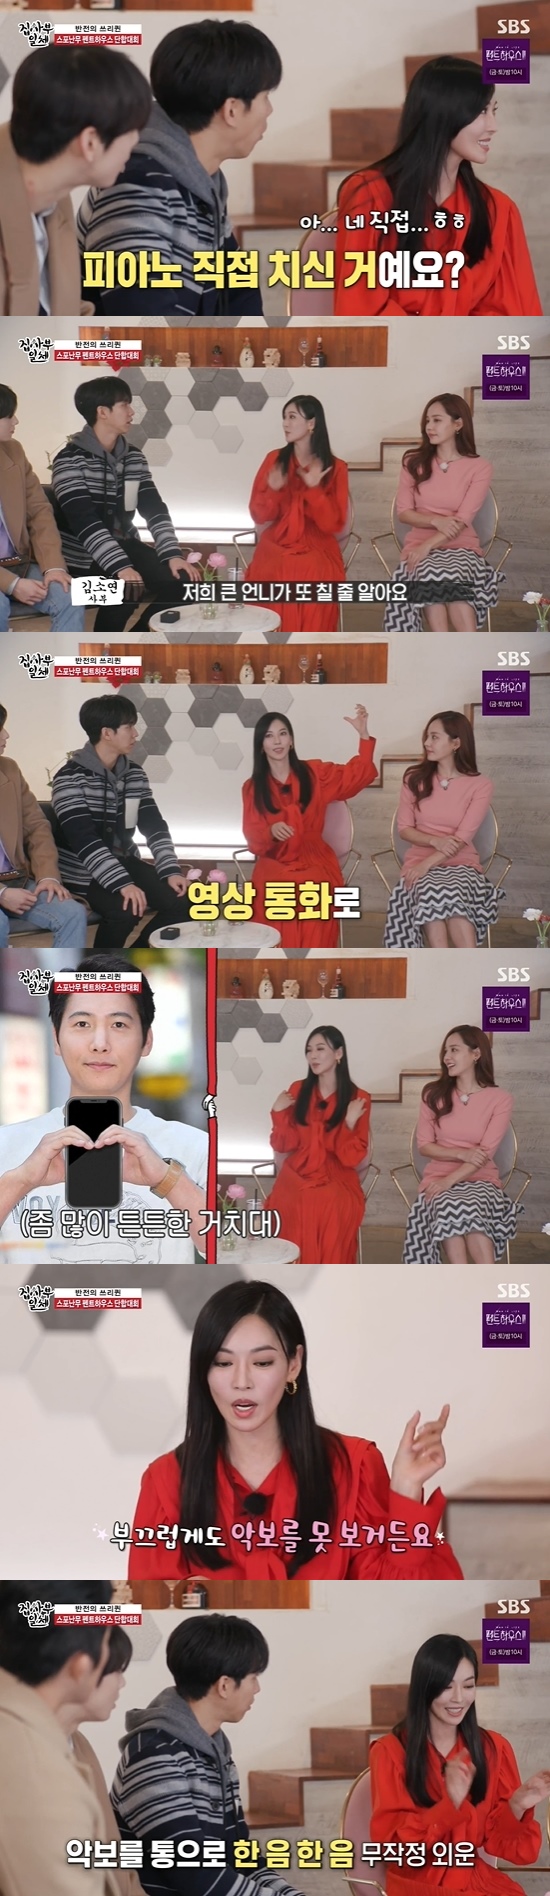 All The Butlers Kim So-yeon reveals husband Lee Sang-woo helped him practice Piano and memorize the scriptOn the 21st, SBS All The Butlers, Kim So-yeon, Lee Ji-ah and Eugene held Penthouse unity contest.Lee Seung-gi said to Kim So-yeons enormous Chain Reaction, Do not play yourself.I am immersed in Chun Seo-jin, he said. He makes Chain Reaction like an onion. Kim So-yeon laughed, I do not laugh when it is not funny. Lee Ji-ah said, There is an absurd side about Kim So-yeon, and Eugene said, If you just scream while shooting, you smile shyly when you cut. So nice and cute?Kim So-yeon revealed that he did Heel in Everything in Eve 20 years ago; since then, Heel is the second, but he thinks people did a lot of Heel.Lee Ji-ah admired Kim So-yeons acting ability to draw the feeling, saying, There is something that is salty despite being the best Heel.Kim So-yeon revealed that he played the topical Penthouse Piano himself, which Kim So-yeon, who was unable to play Piano, practiced for his work.Kim So-yeon said: I learned from my big sister on video calls; my mom and husband listened to the video.I was ashamed to say, What way is the road? And I started by asking everyone, Kim So-yeon plays Piano on the spot.Kim So-yeon later revealed about everything about Eve in the character quiz.Eugene, who saw Kim So-yeon committing evil in the drama, said, There was Chun Seo-jin from there, and Kim So-yeon laughed, saying, Heo Young-mi is the foundation of Chun Seo-jin.Kim So-yeon, who played the role of announcer, received training like MBC new announcers.Kim So-yeon said action practice was the most memorable: he practiced the next day as soon as he was cast.Kim So-yeon said, I was injured during the action and I stitched my legs 12 stitches, but I went to the gym that day. I exercised my upper body because I would lose my muscles if I did not do it for a day.Kim So-yeon also revealed how to memorize the ambassador, saying Kim So-yeon wrote several practice books, saying, I used to memorize it in the past.Kim So-yeon said, My husband Lee Sang-woo said it was a waste of time. My husband has been so busy and memorized these days.Photo = SBS Broadcasting Screen